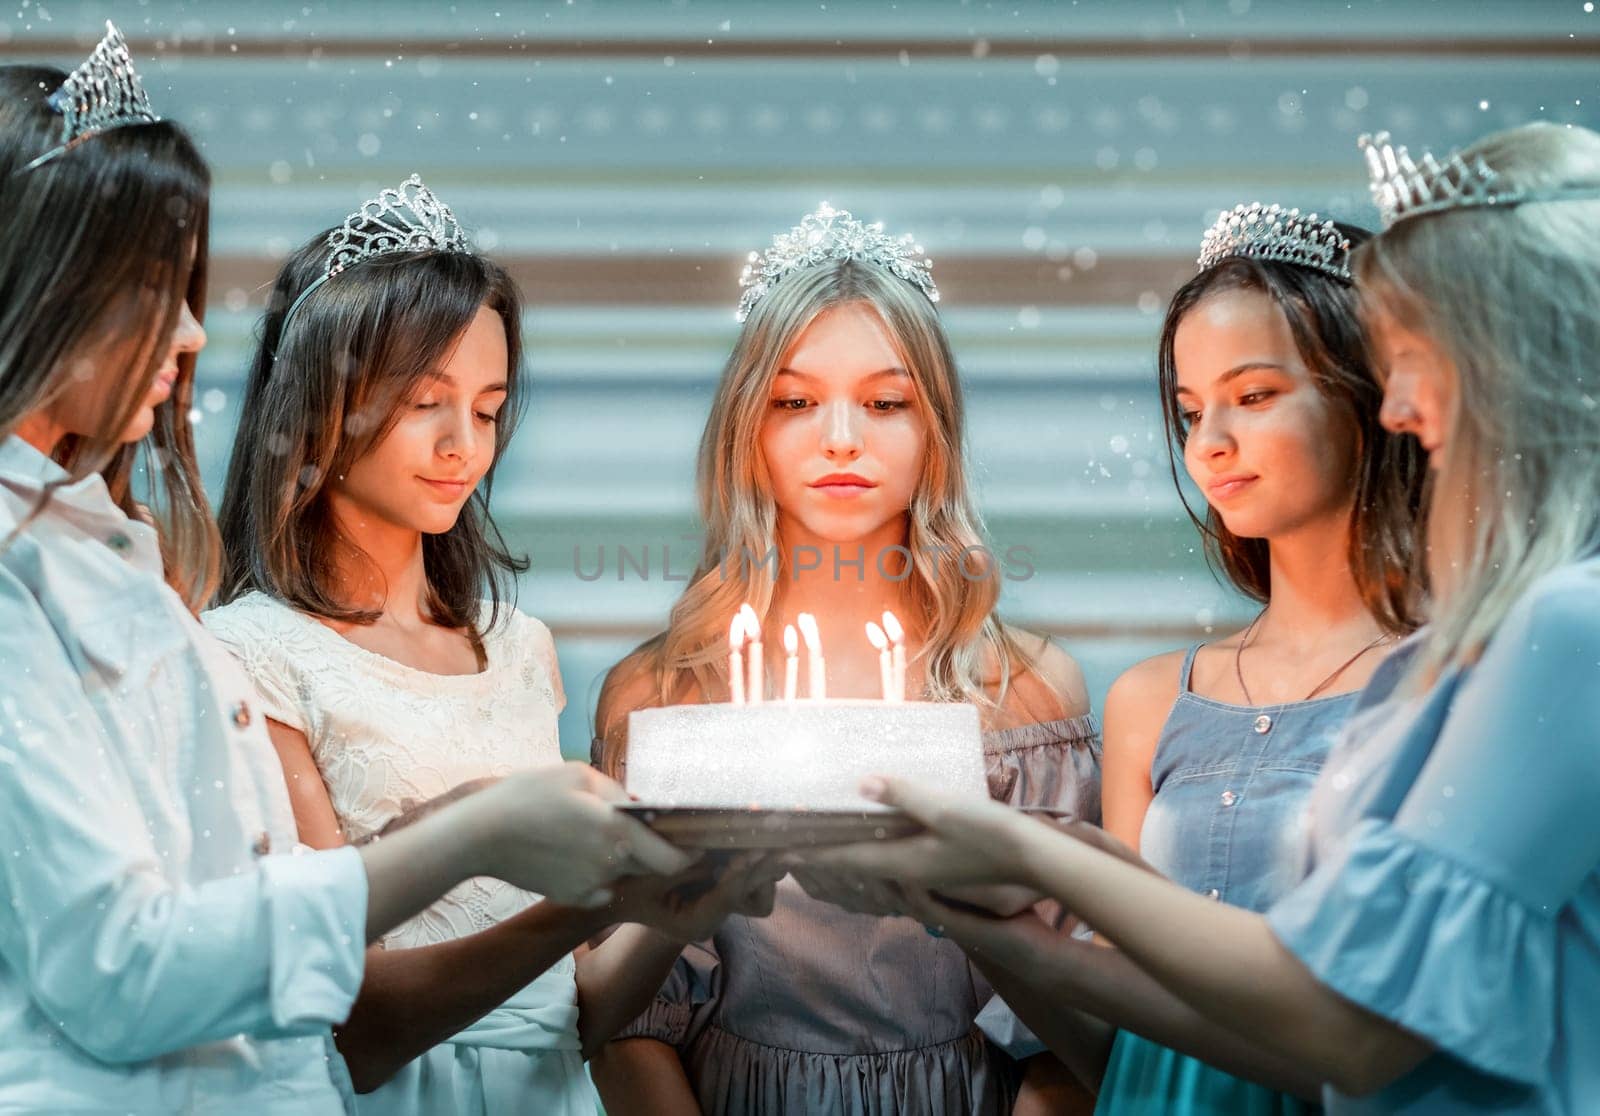 Cute birthday girl and friends holding cake with candles